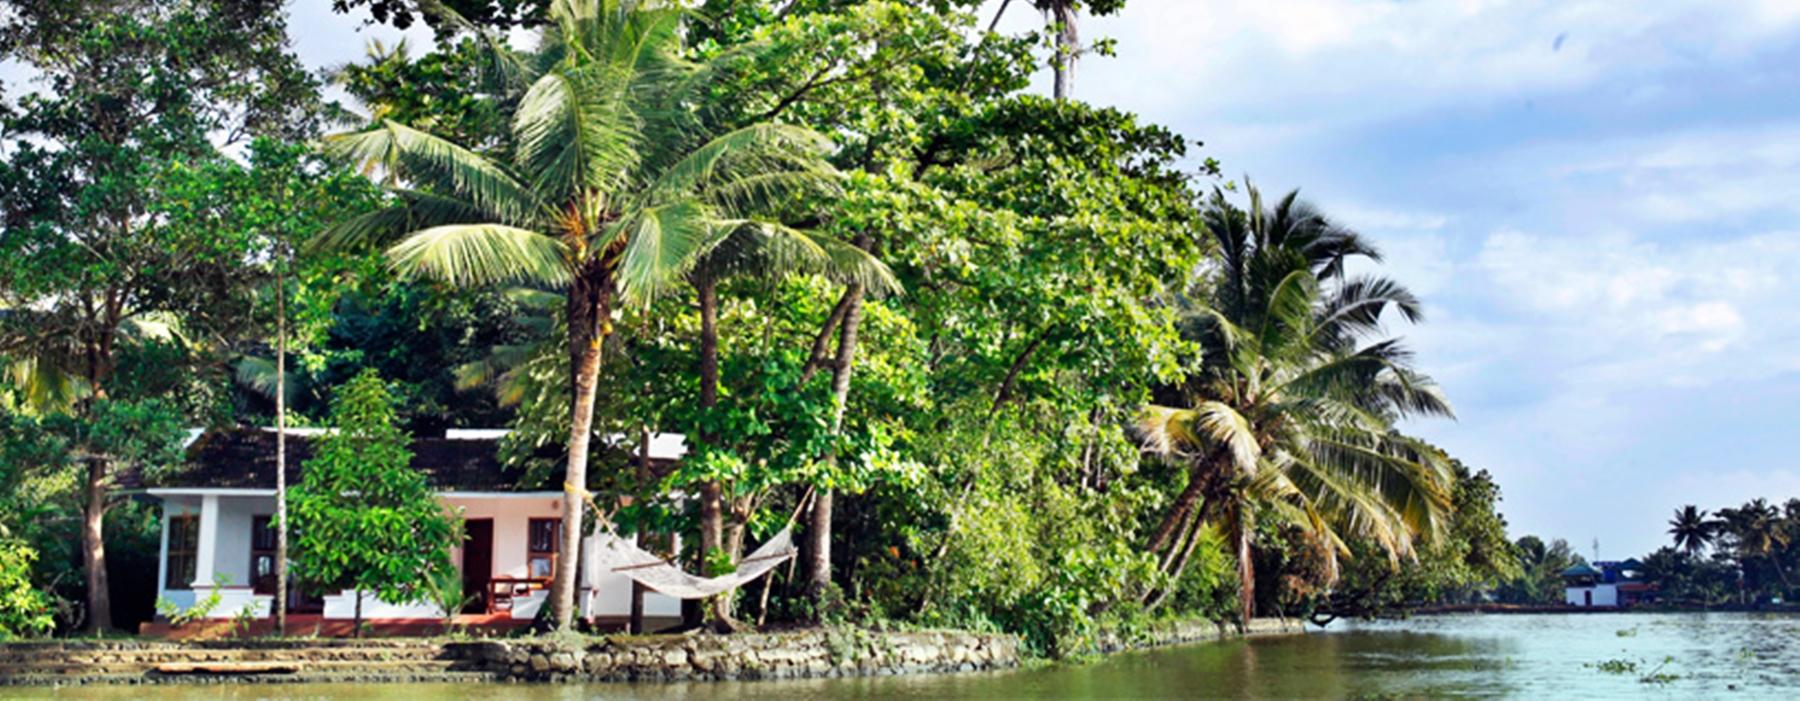 Our Land Island Backwater Resort